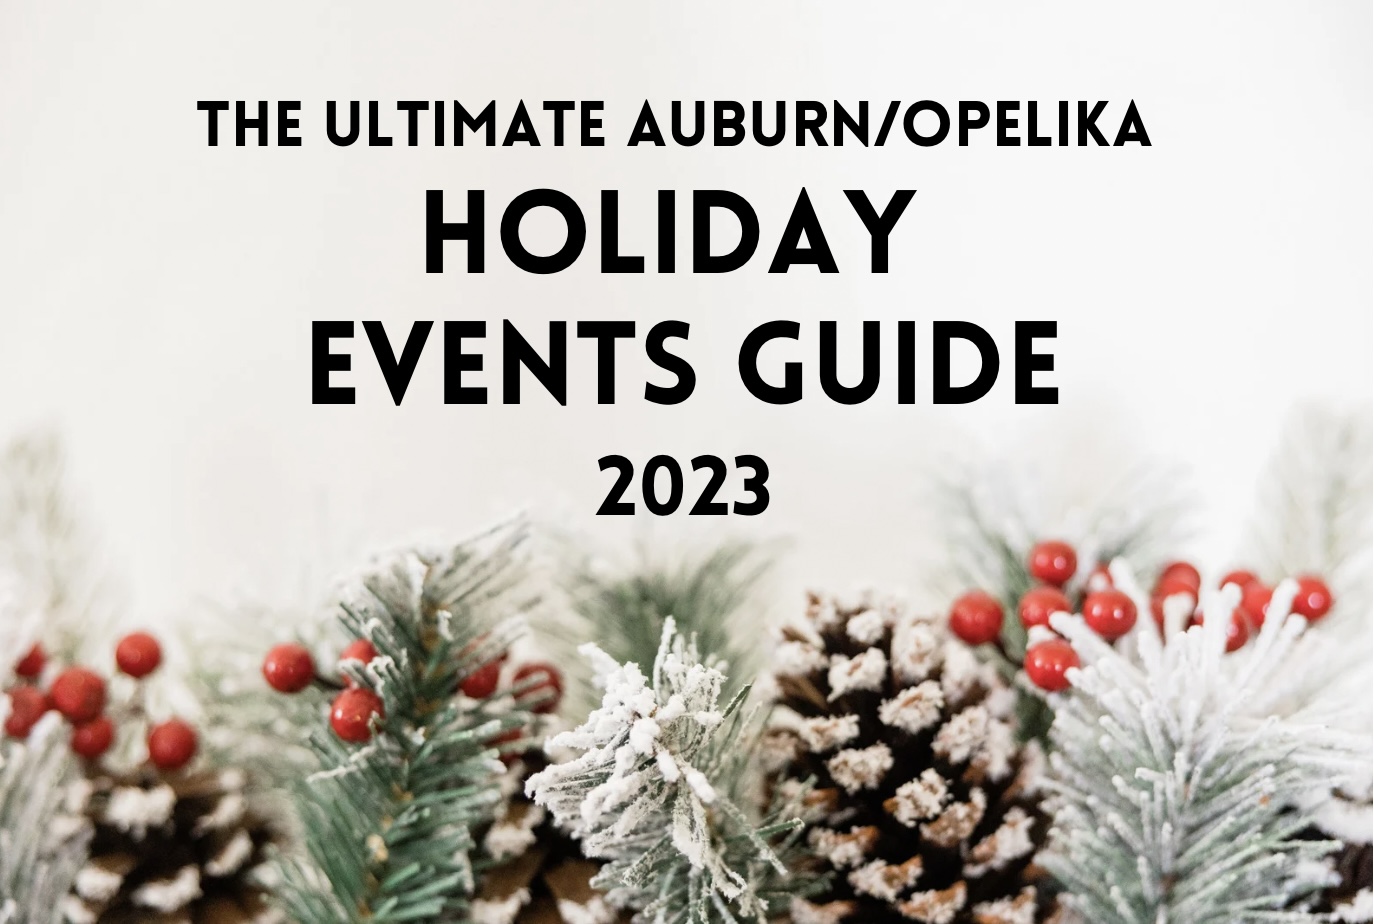 The Ultimate Auburn/Opelika Holiday Events Guide 2023